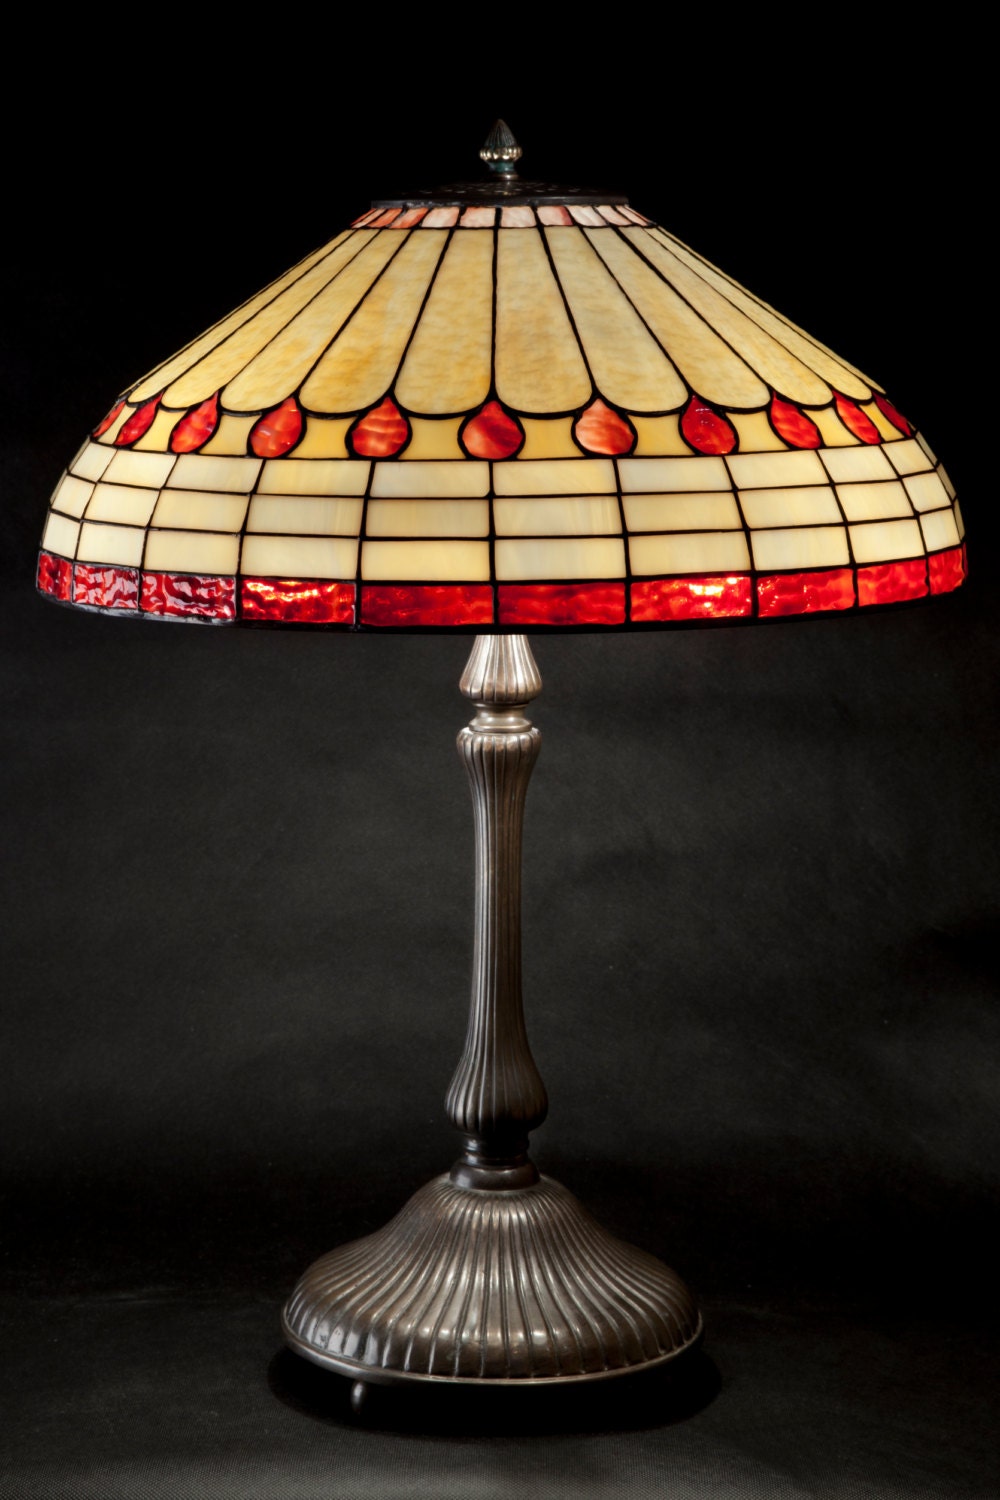 Art Deco Lamp Shade Light, Antique Glass Lamp Shades For Table Lamps